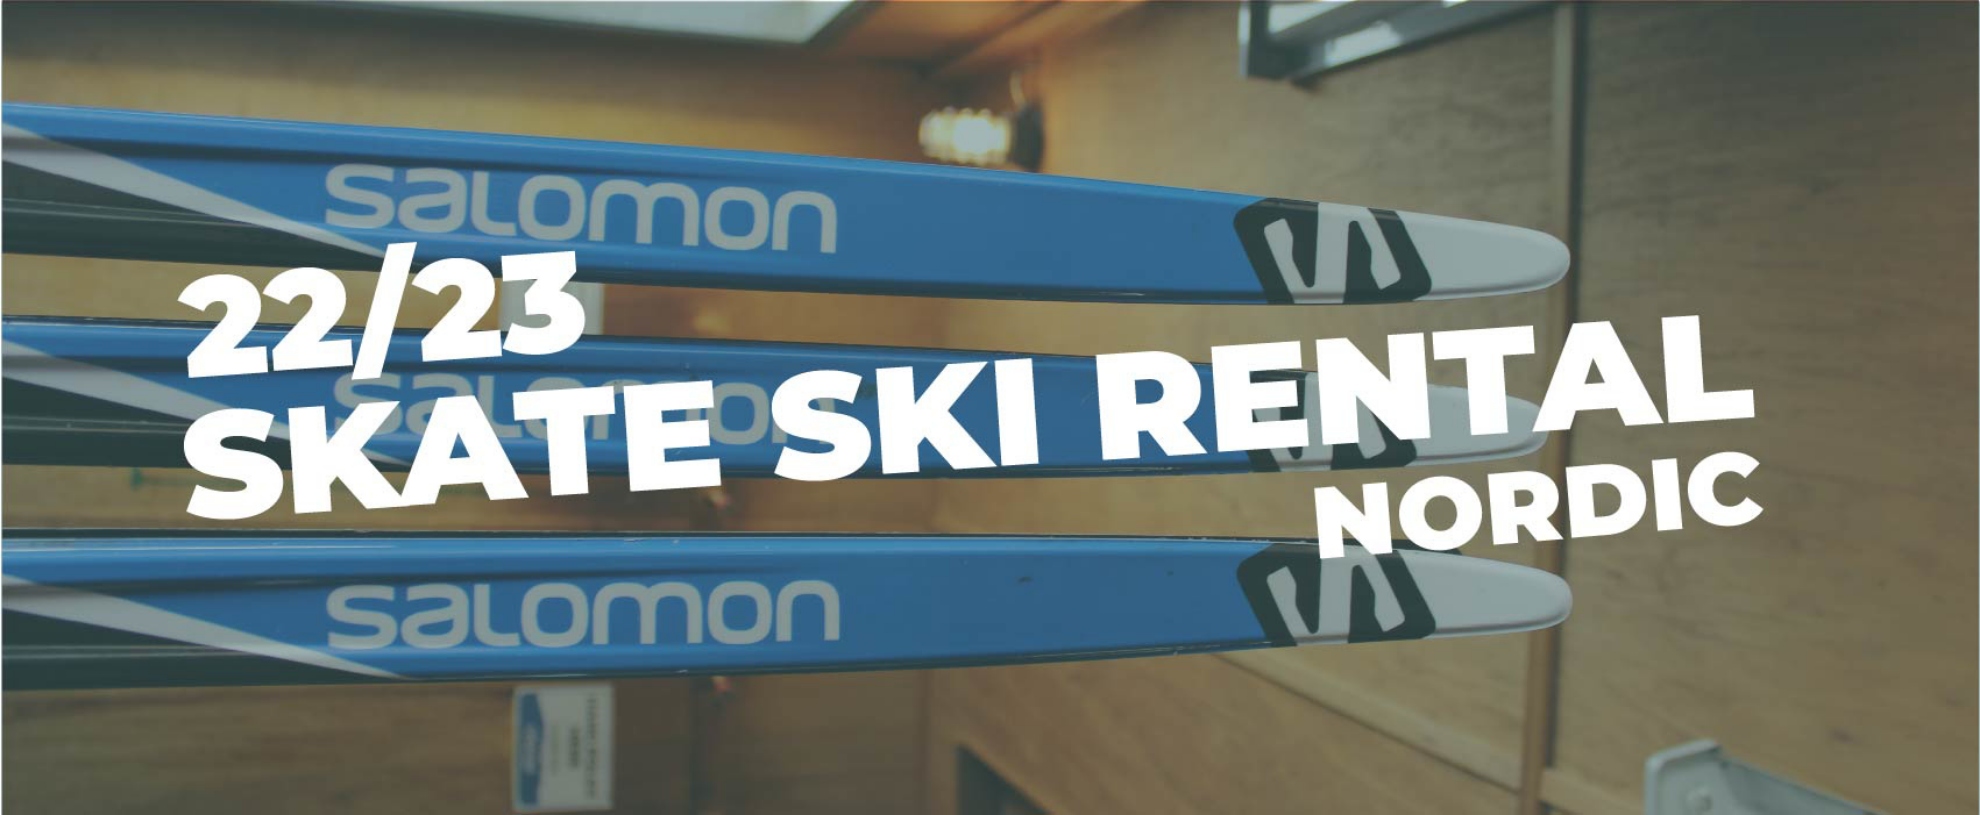 Rental Selection Adult - XC Daily - Skate Skis Only